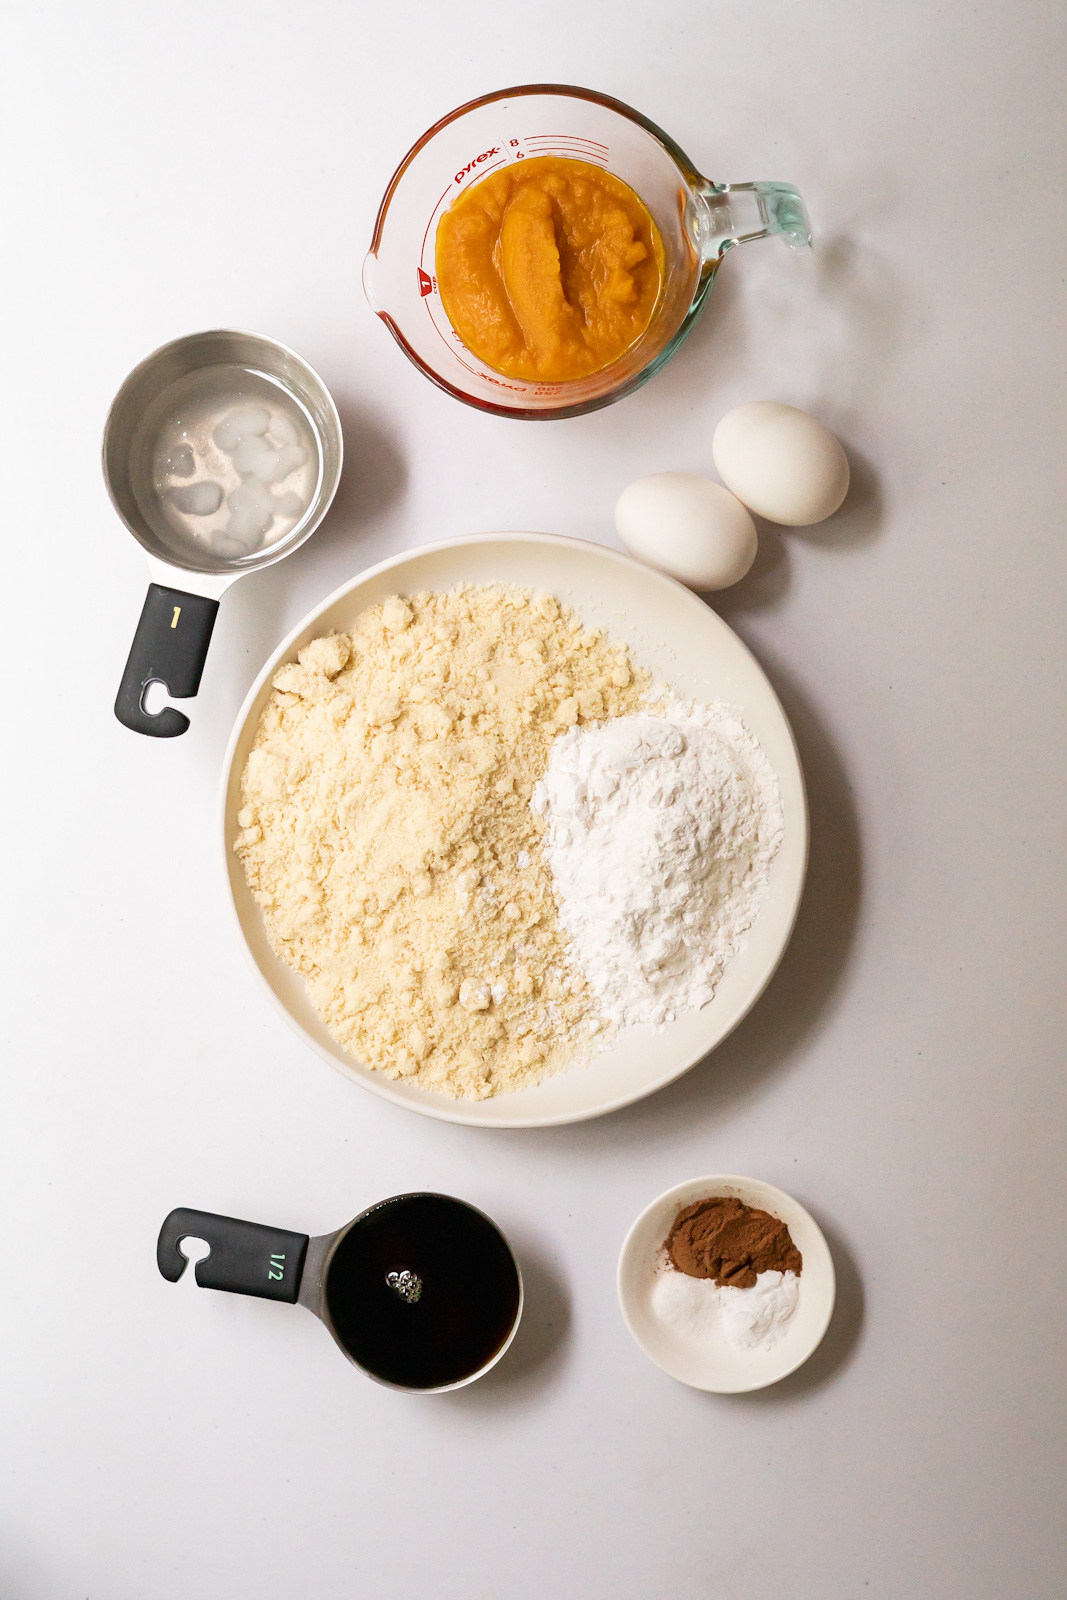 Overhead view of the 9 ingredients you need to make this recipe measured and ready to use.